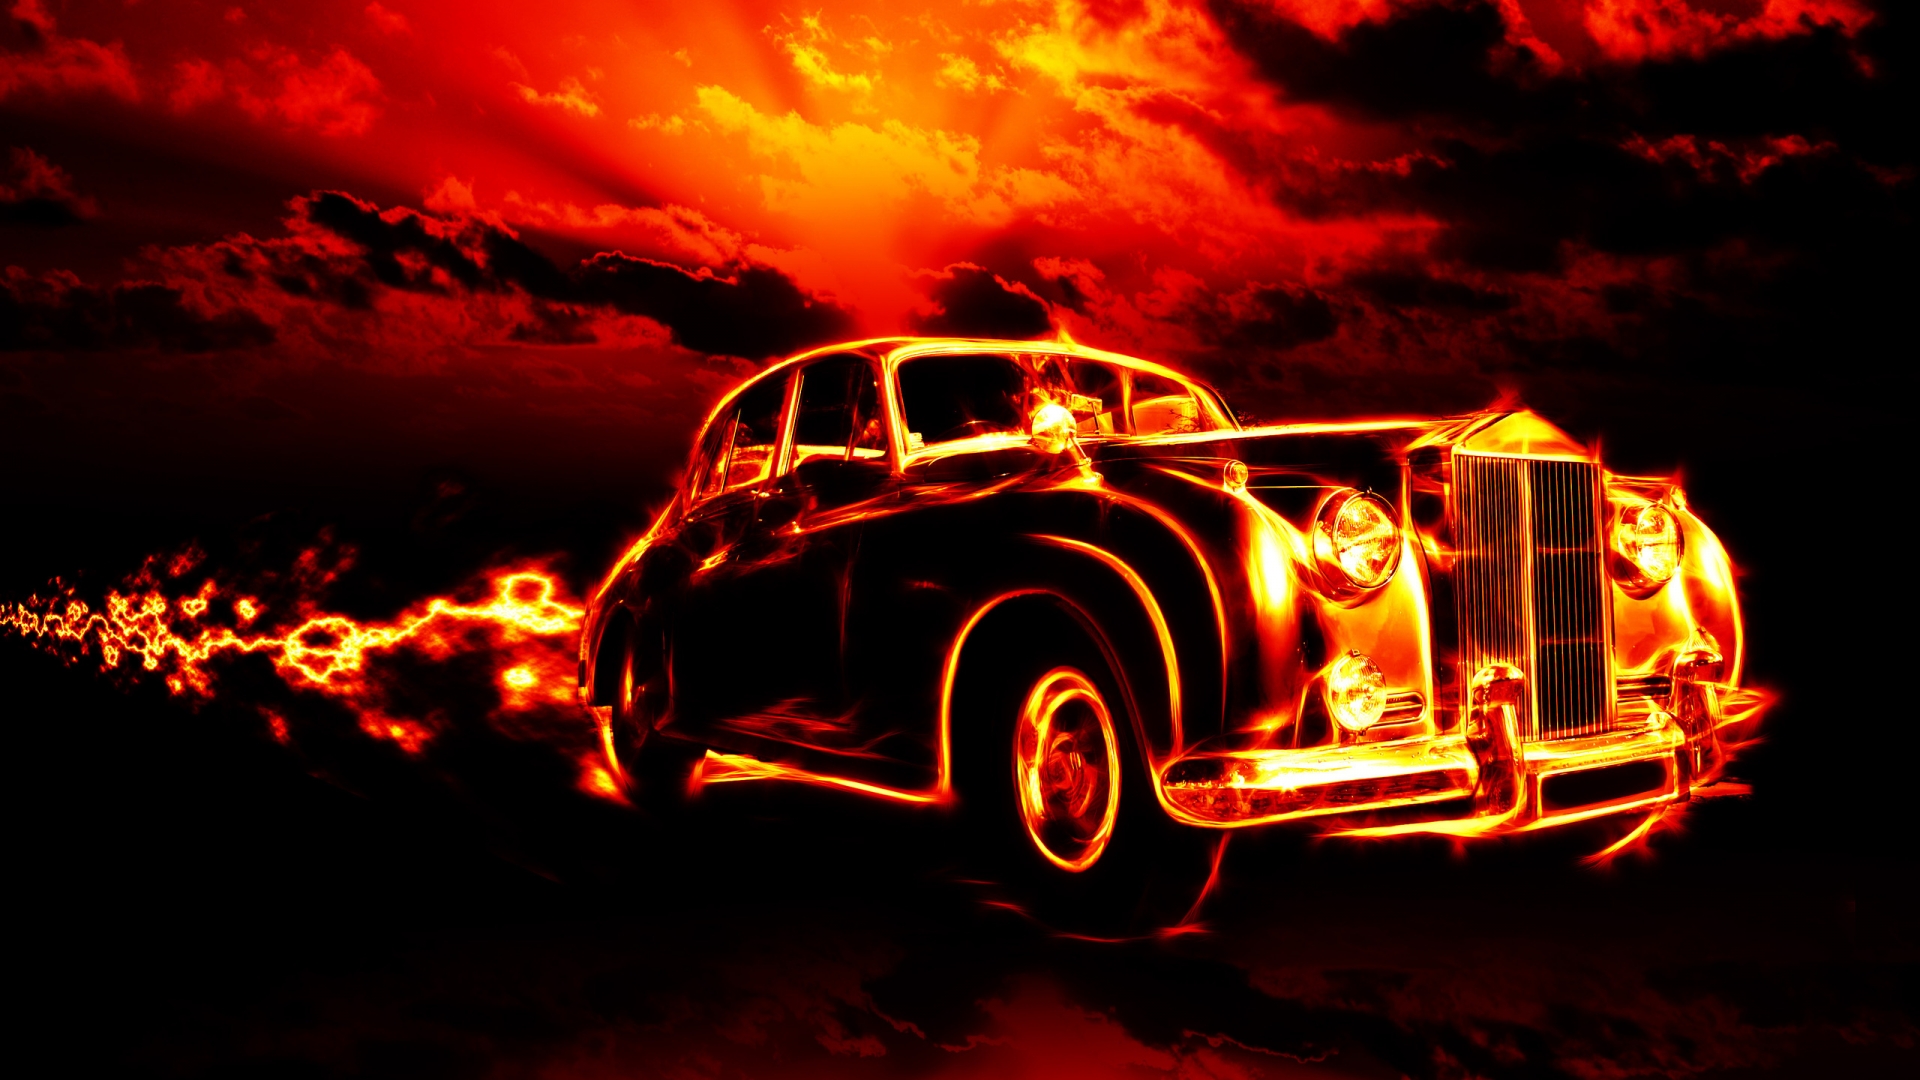 Vintage Car in Fire for 1920 x 1080 HDTV 1080p resolution